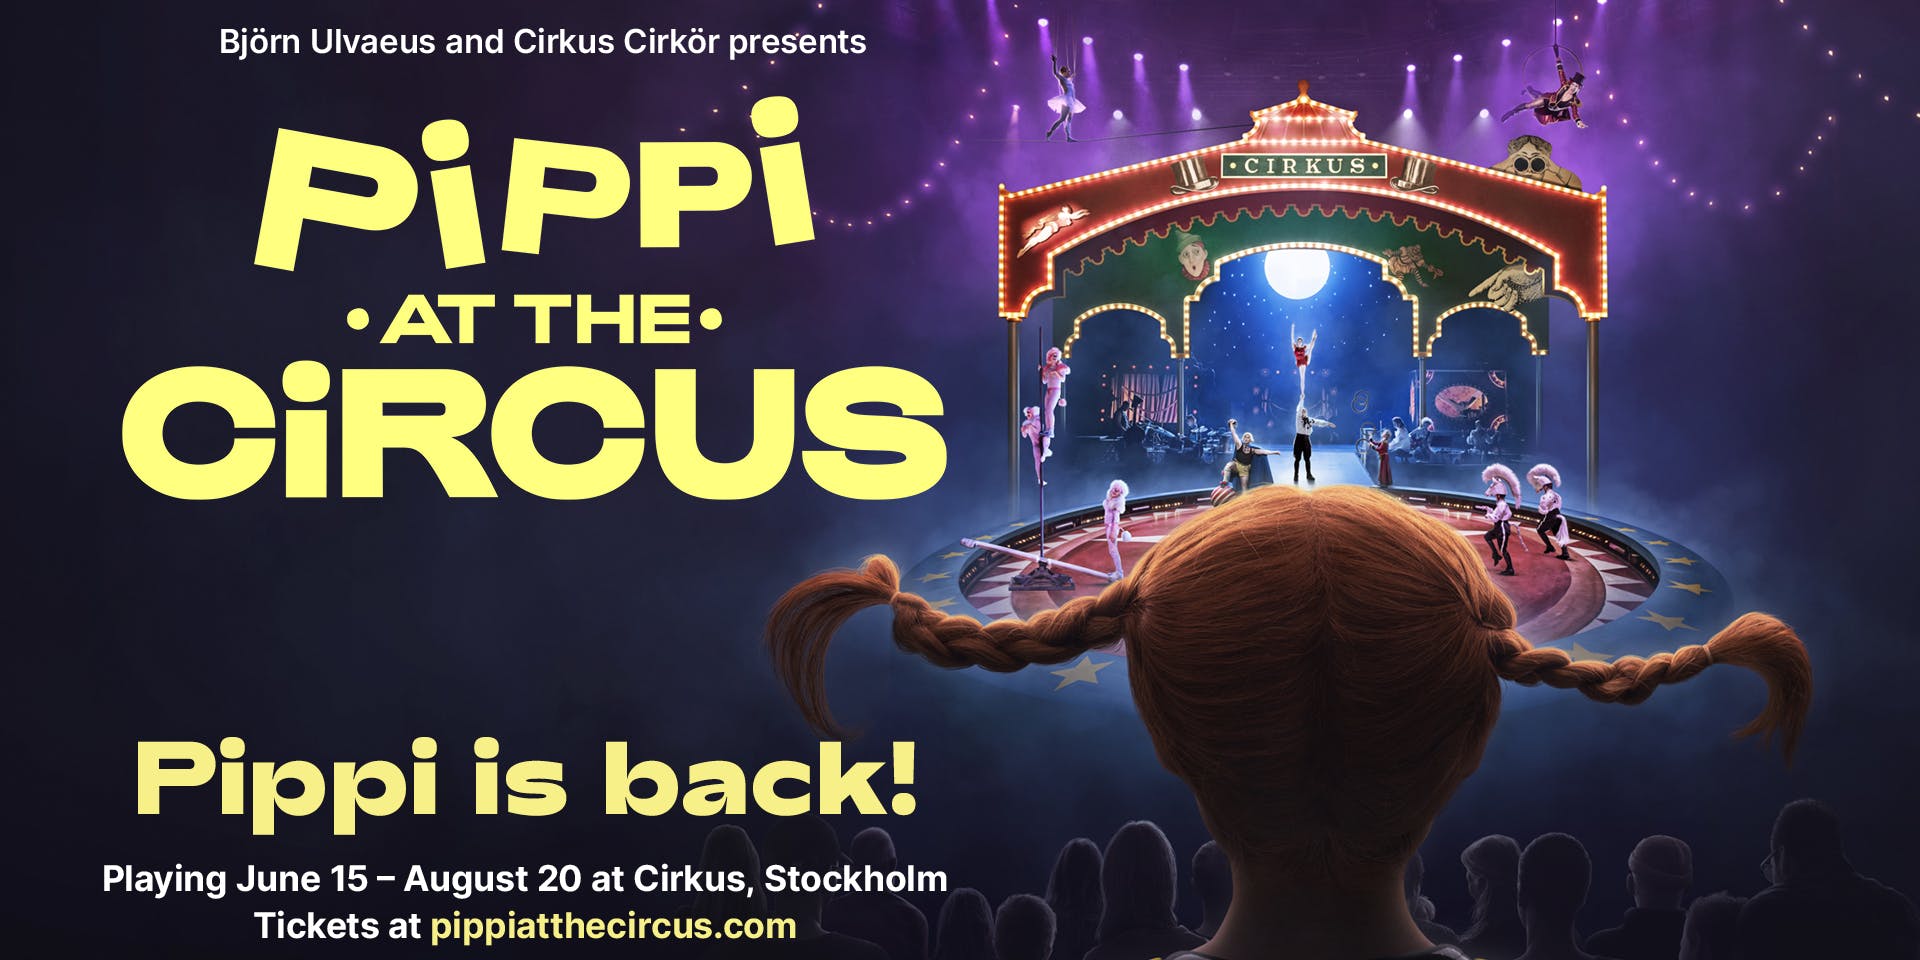 Pippi at the Circus promo poster